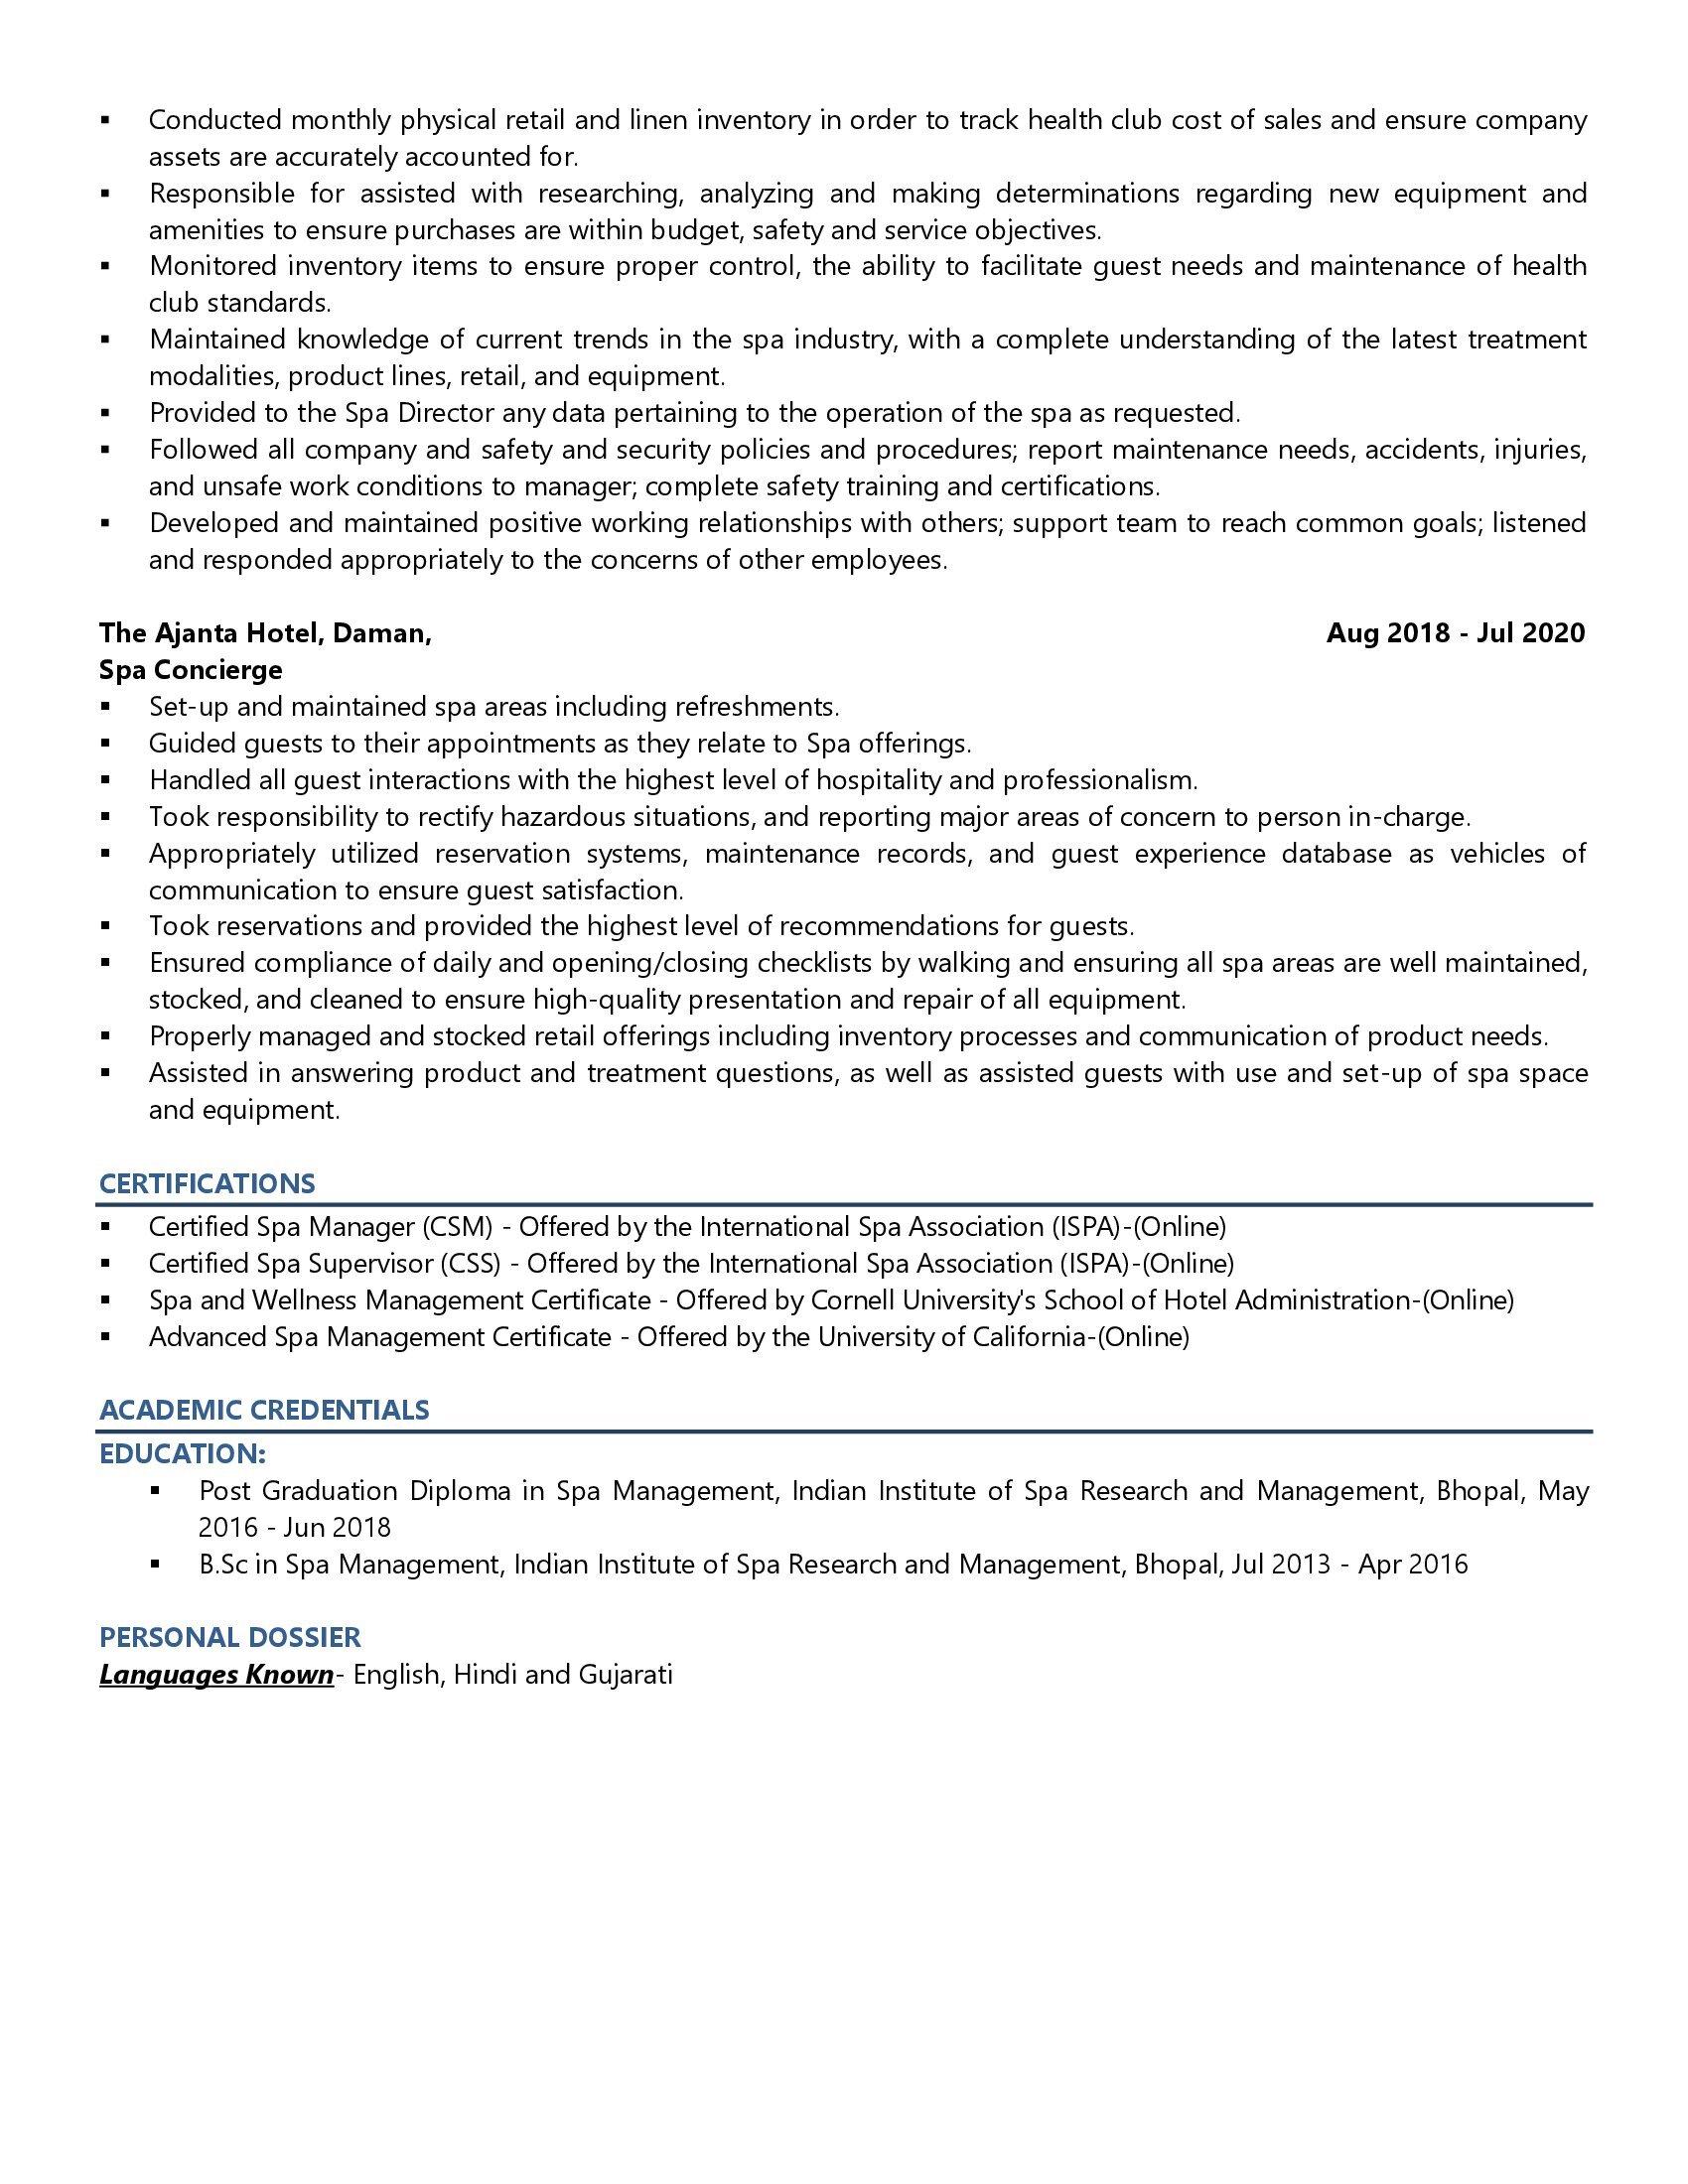 Spa Manager - Resume Example & Template